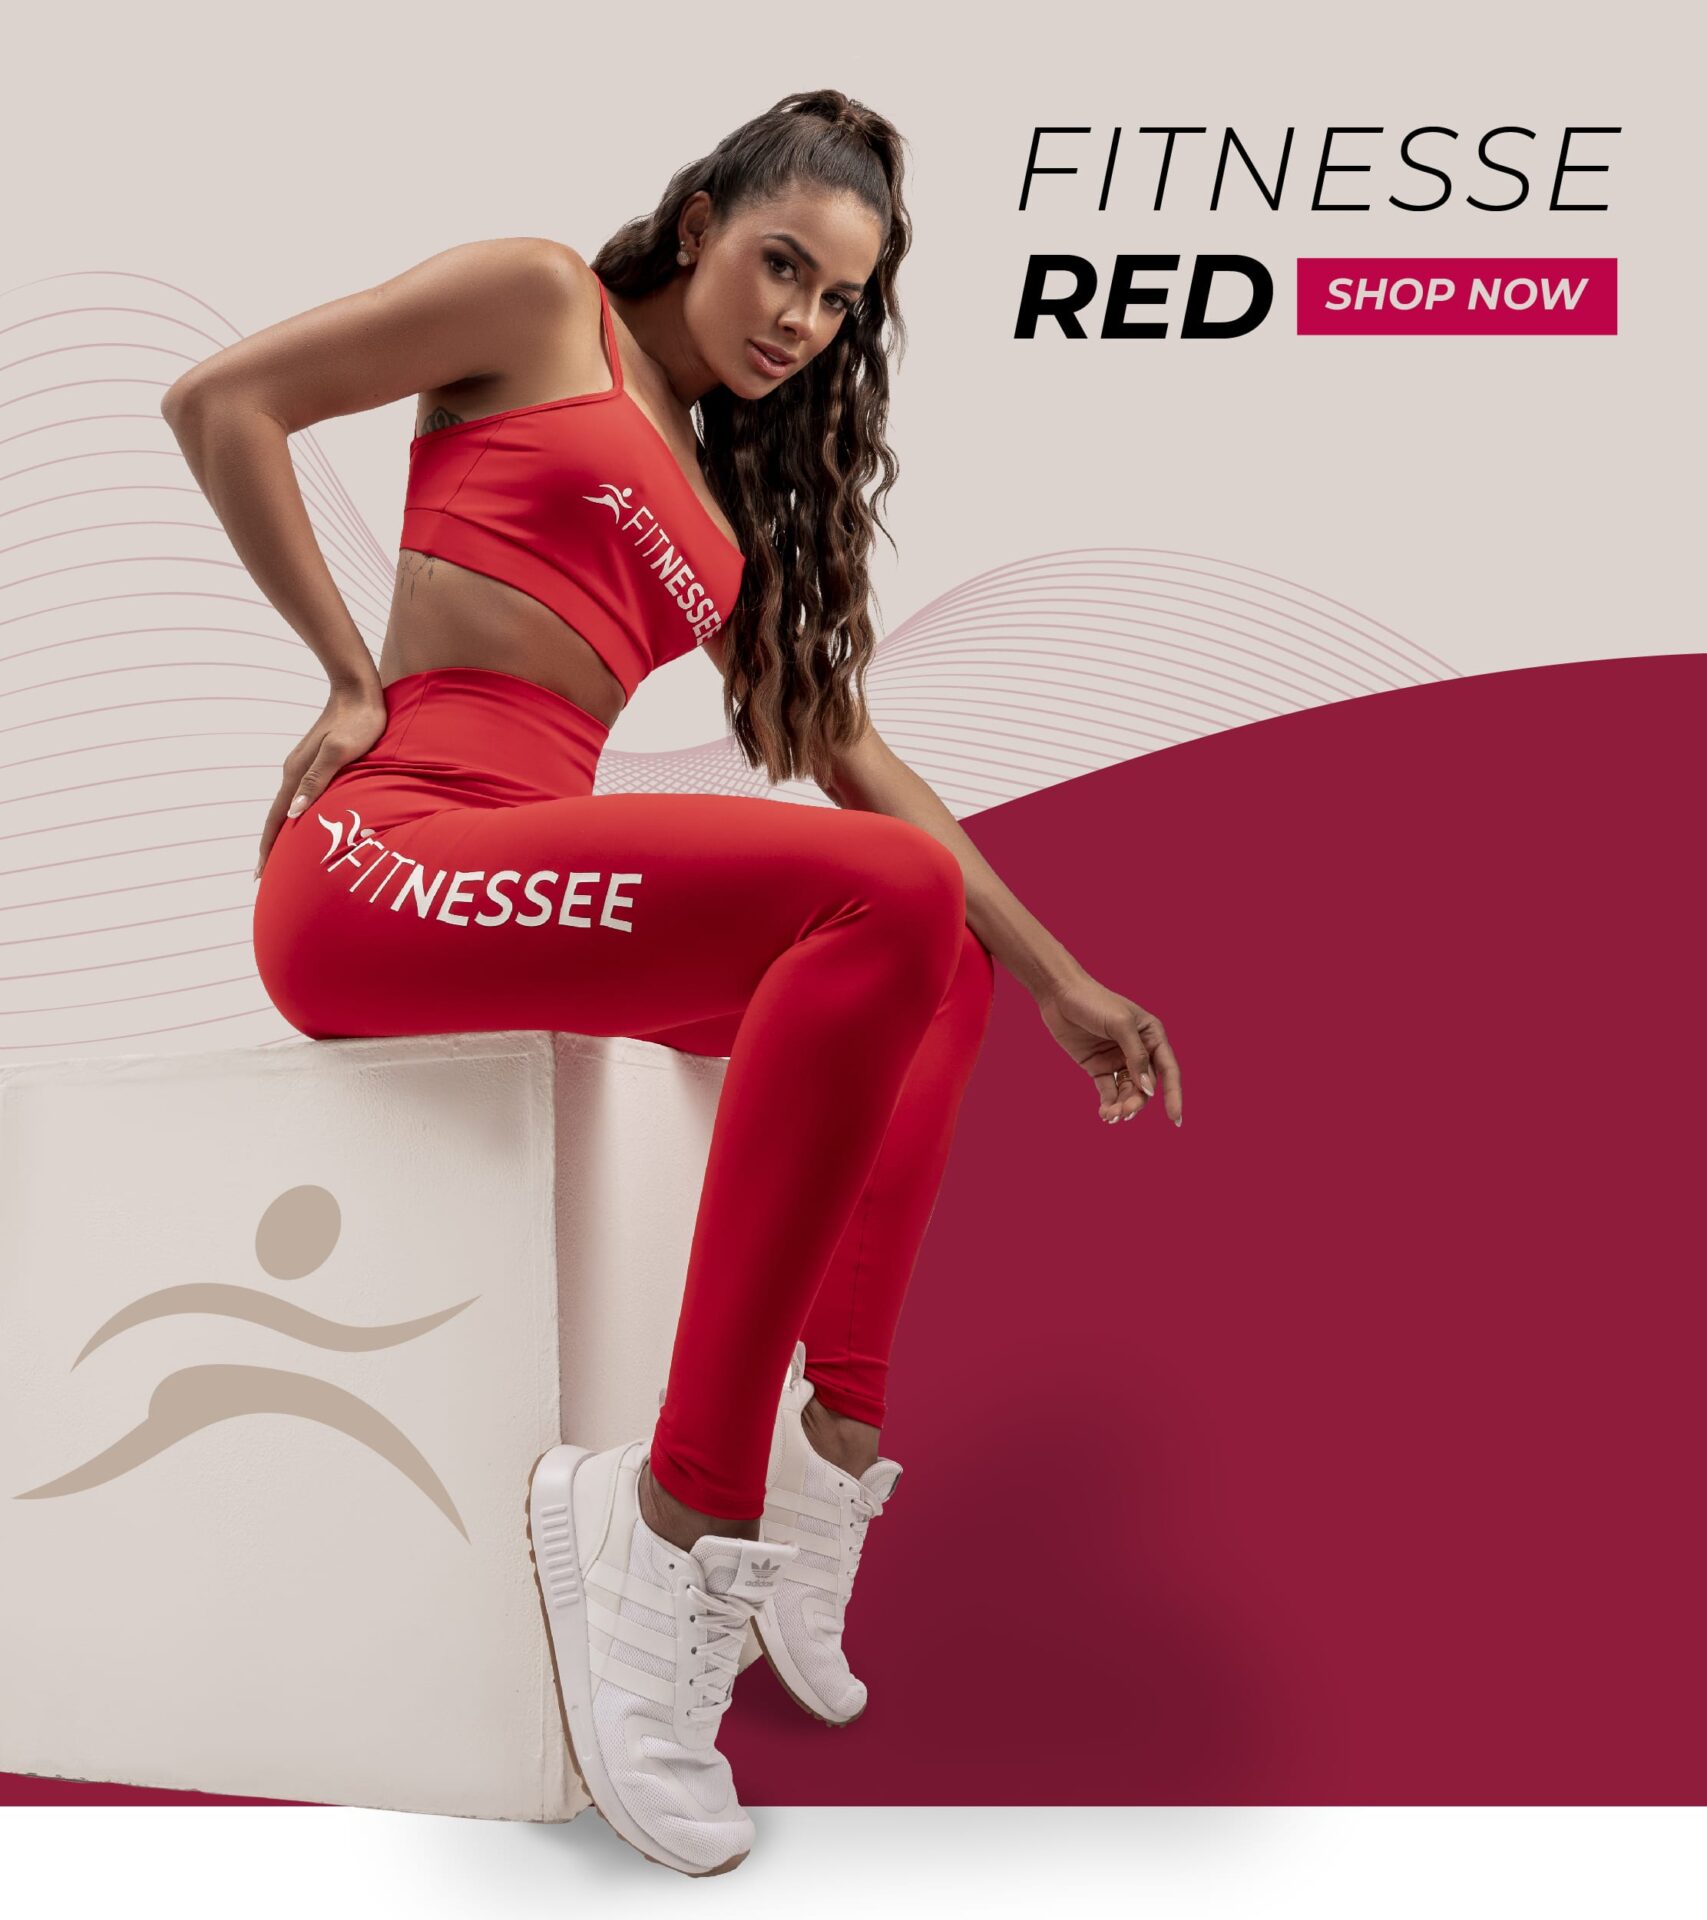 Shop Fitnessee Red